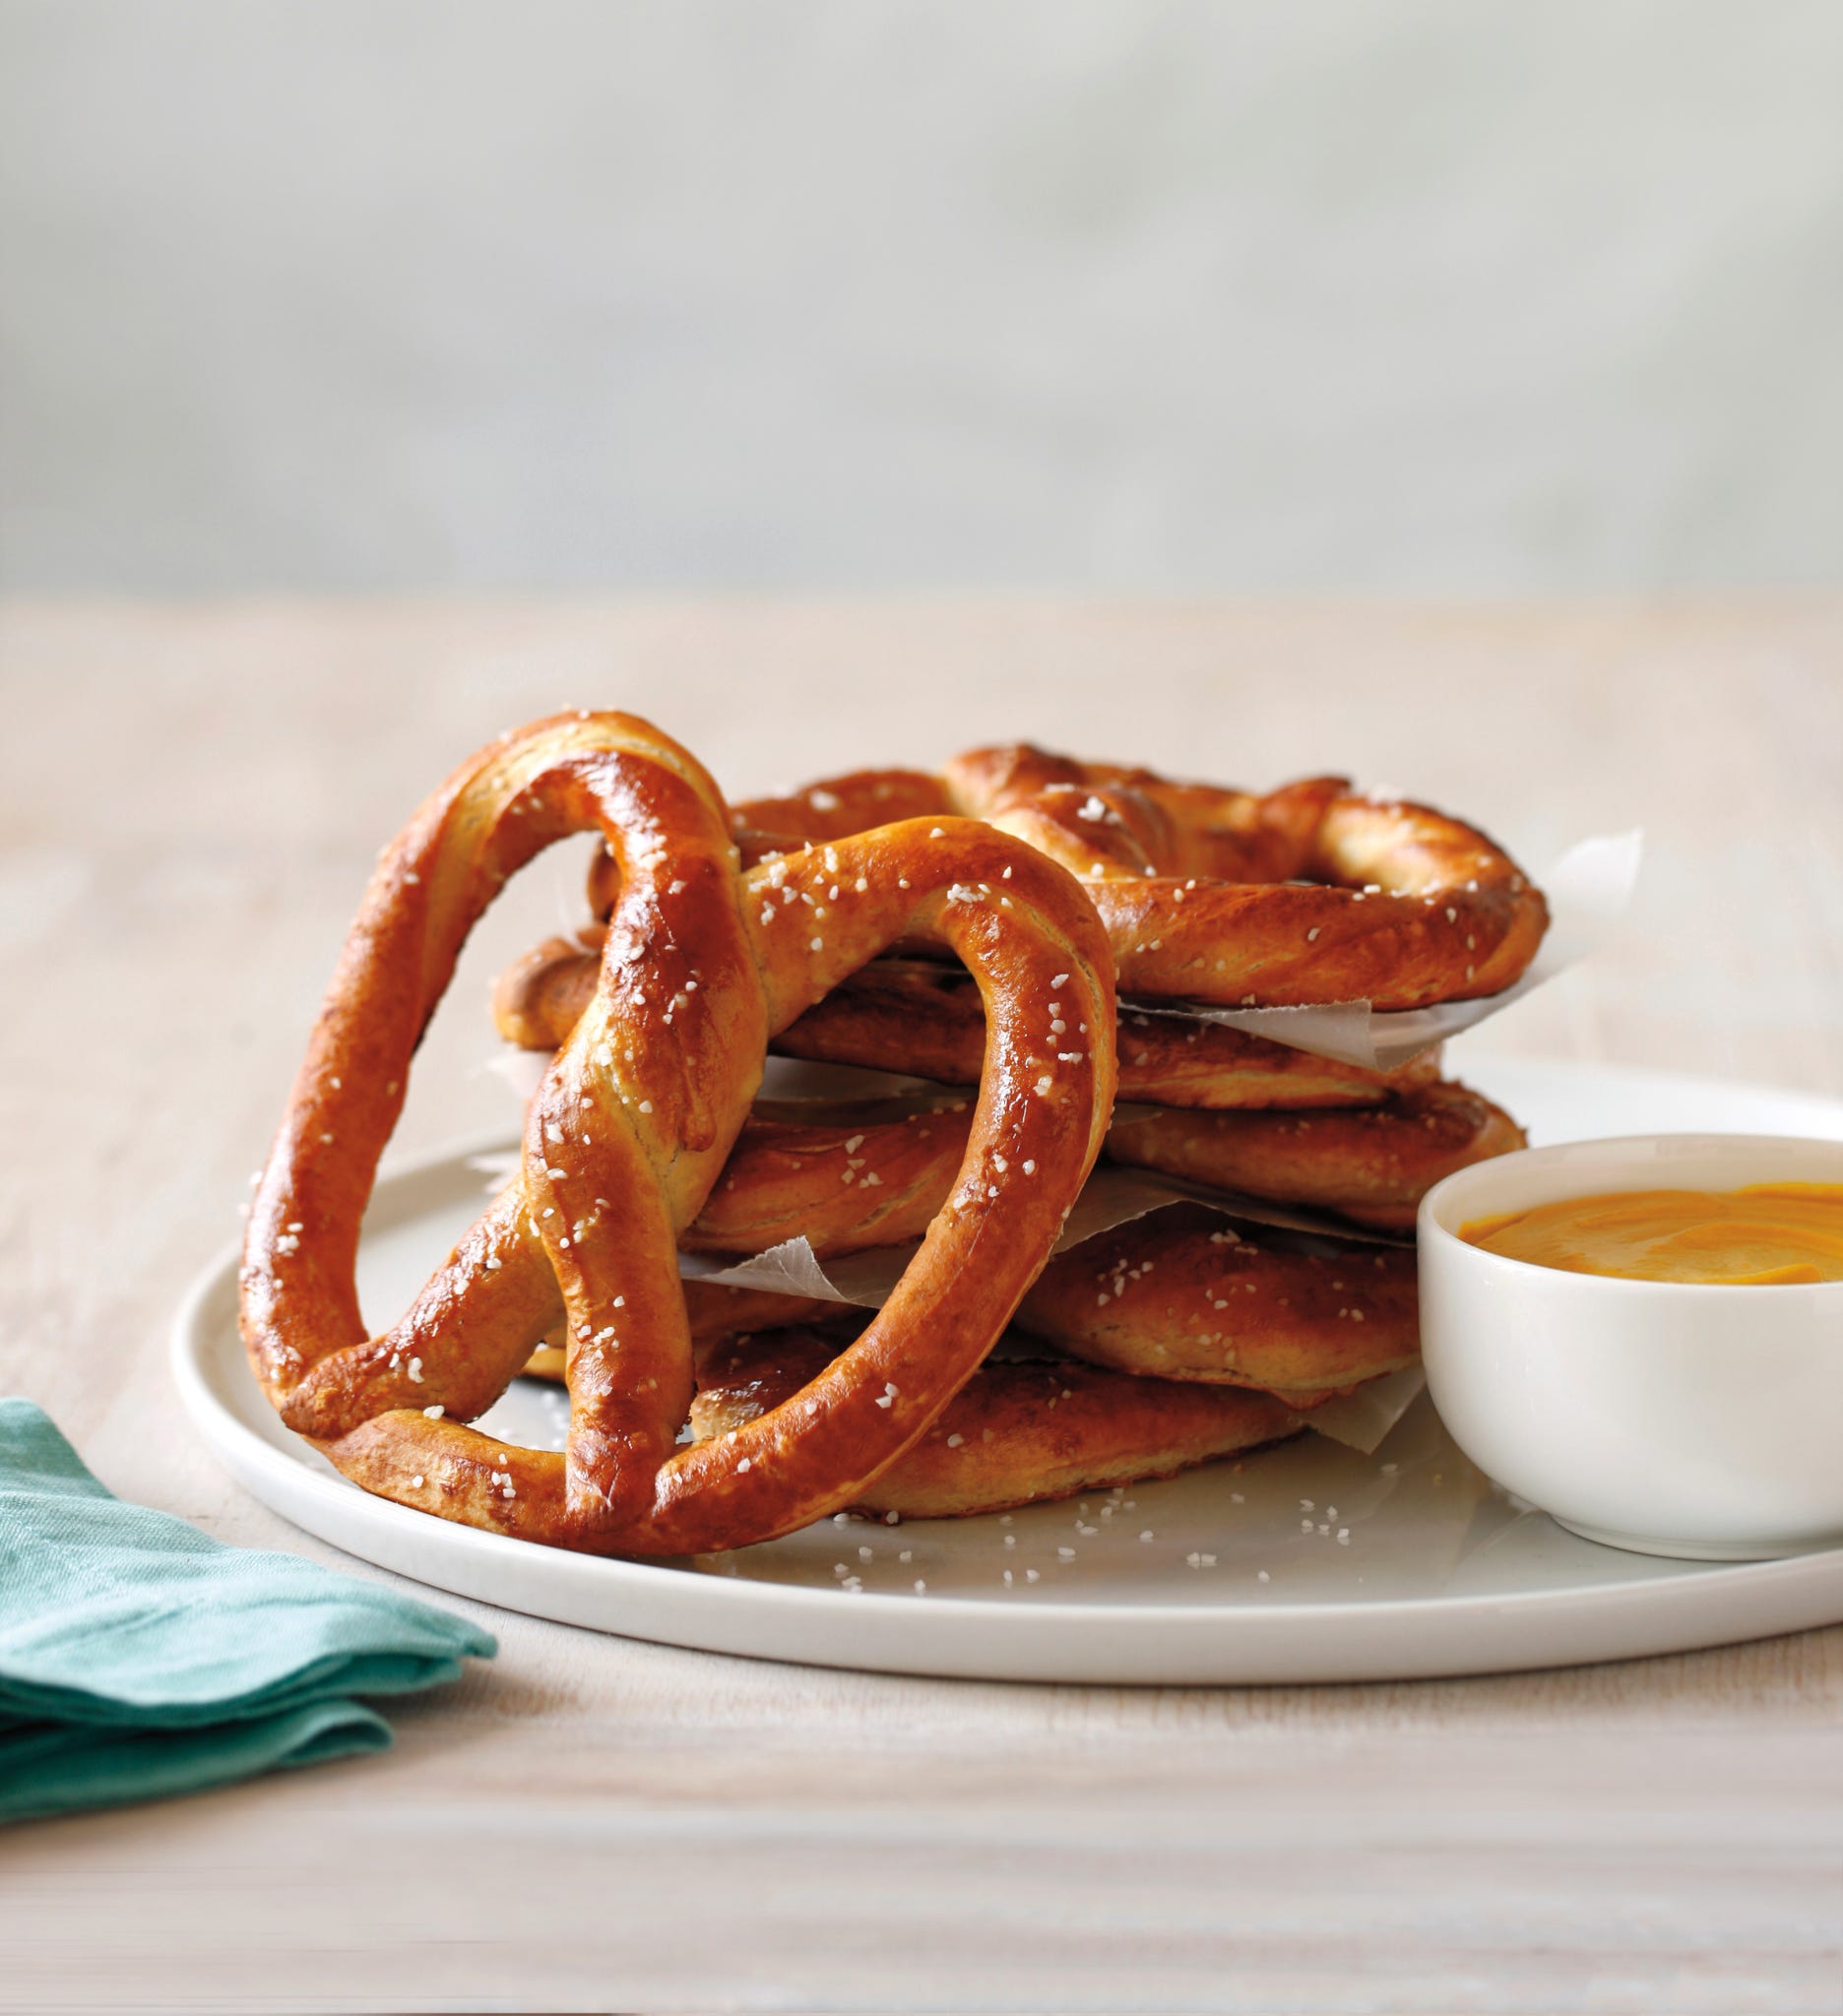 National Pretzel Day 2021: Get a free pretzel or deal at Wendy's, Auntie Anne's, Sonic Drive-In and more Monday